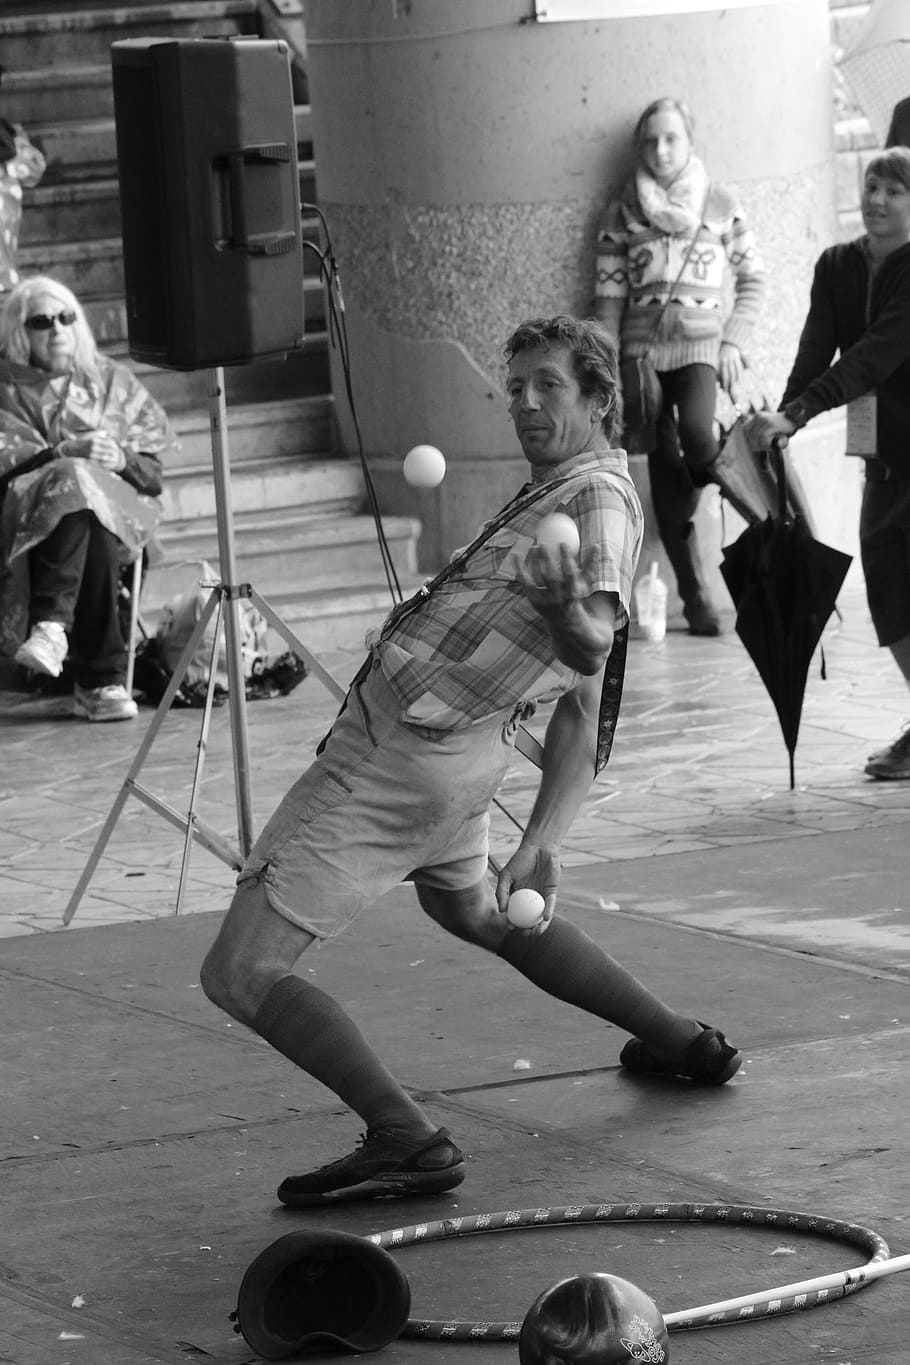 juggler, agility, entertainment, performance, juggling, concentration, ball, fun, acrobatic, male